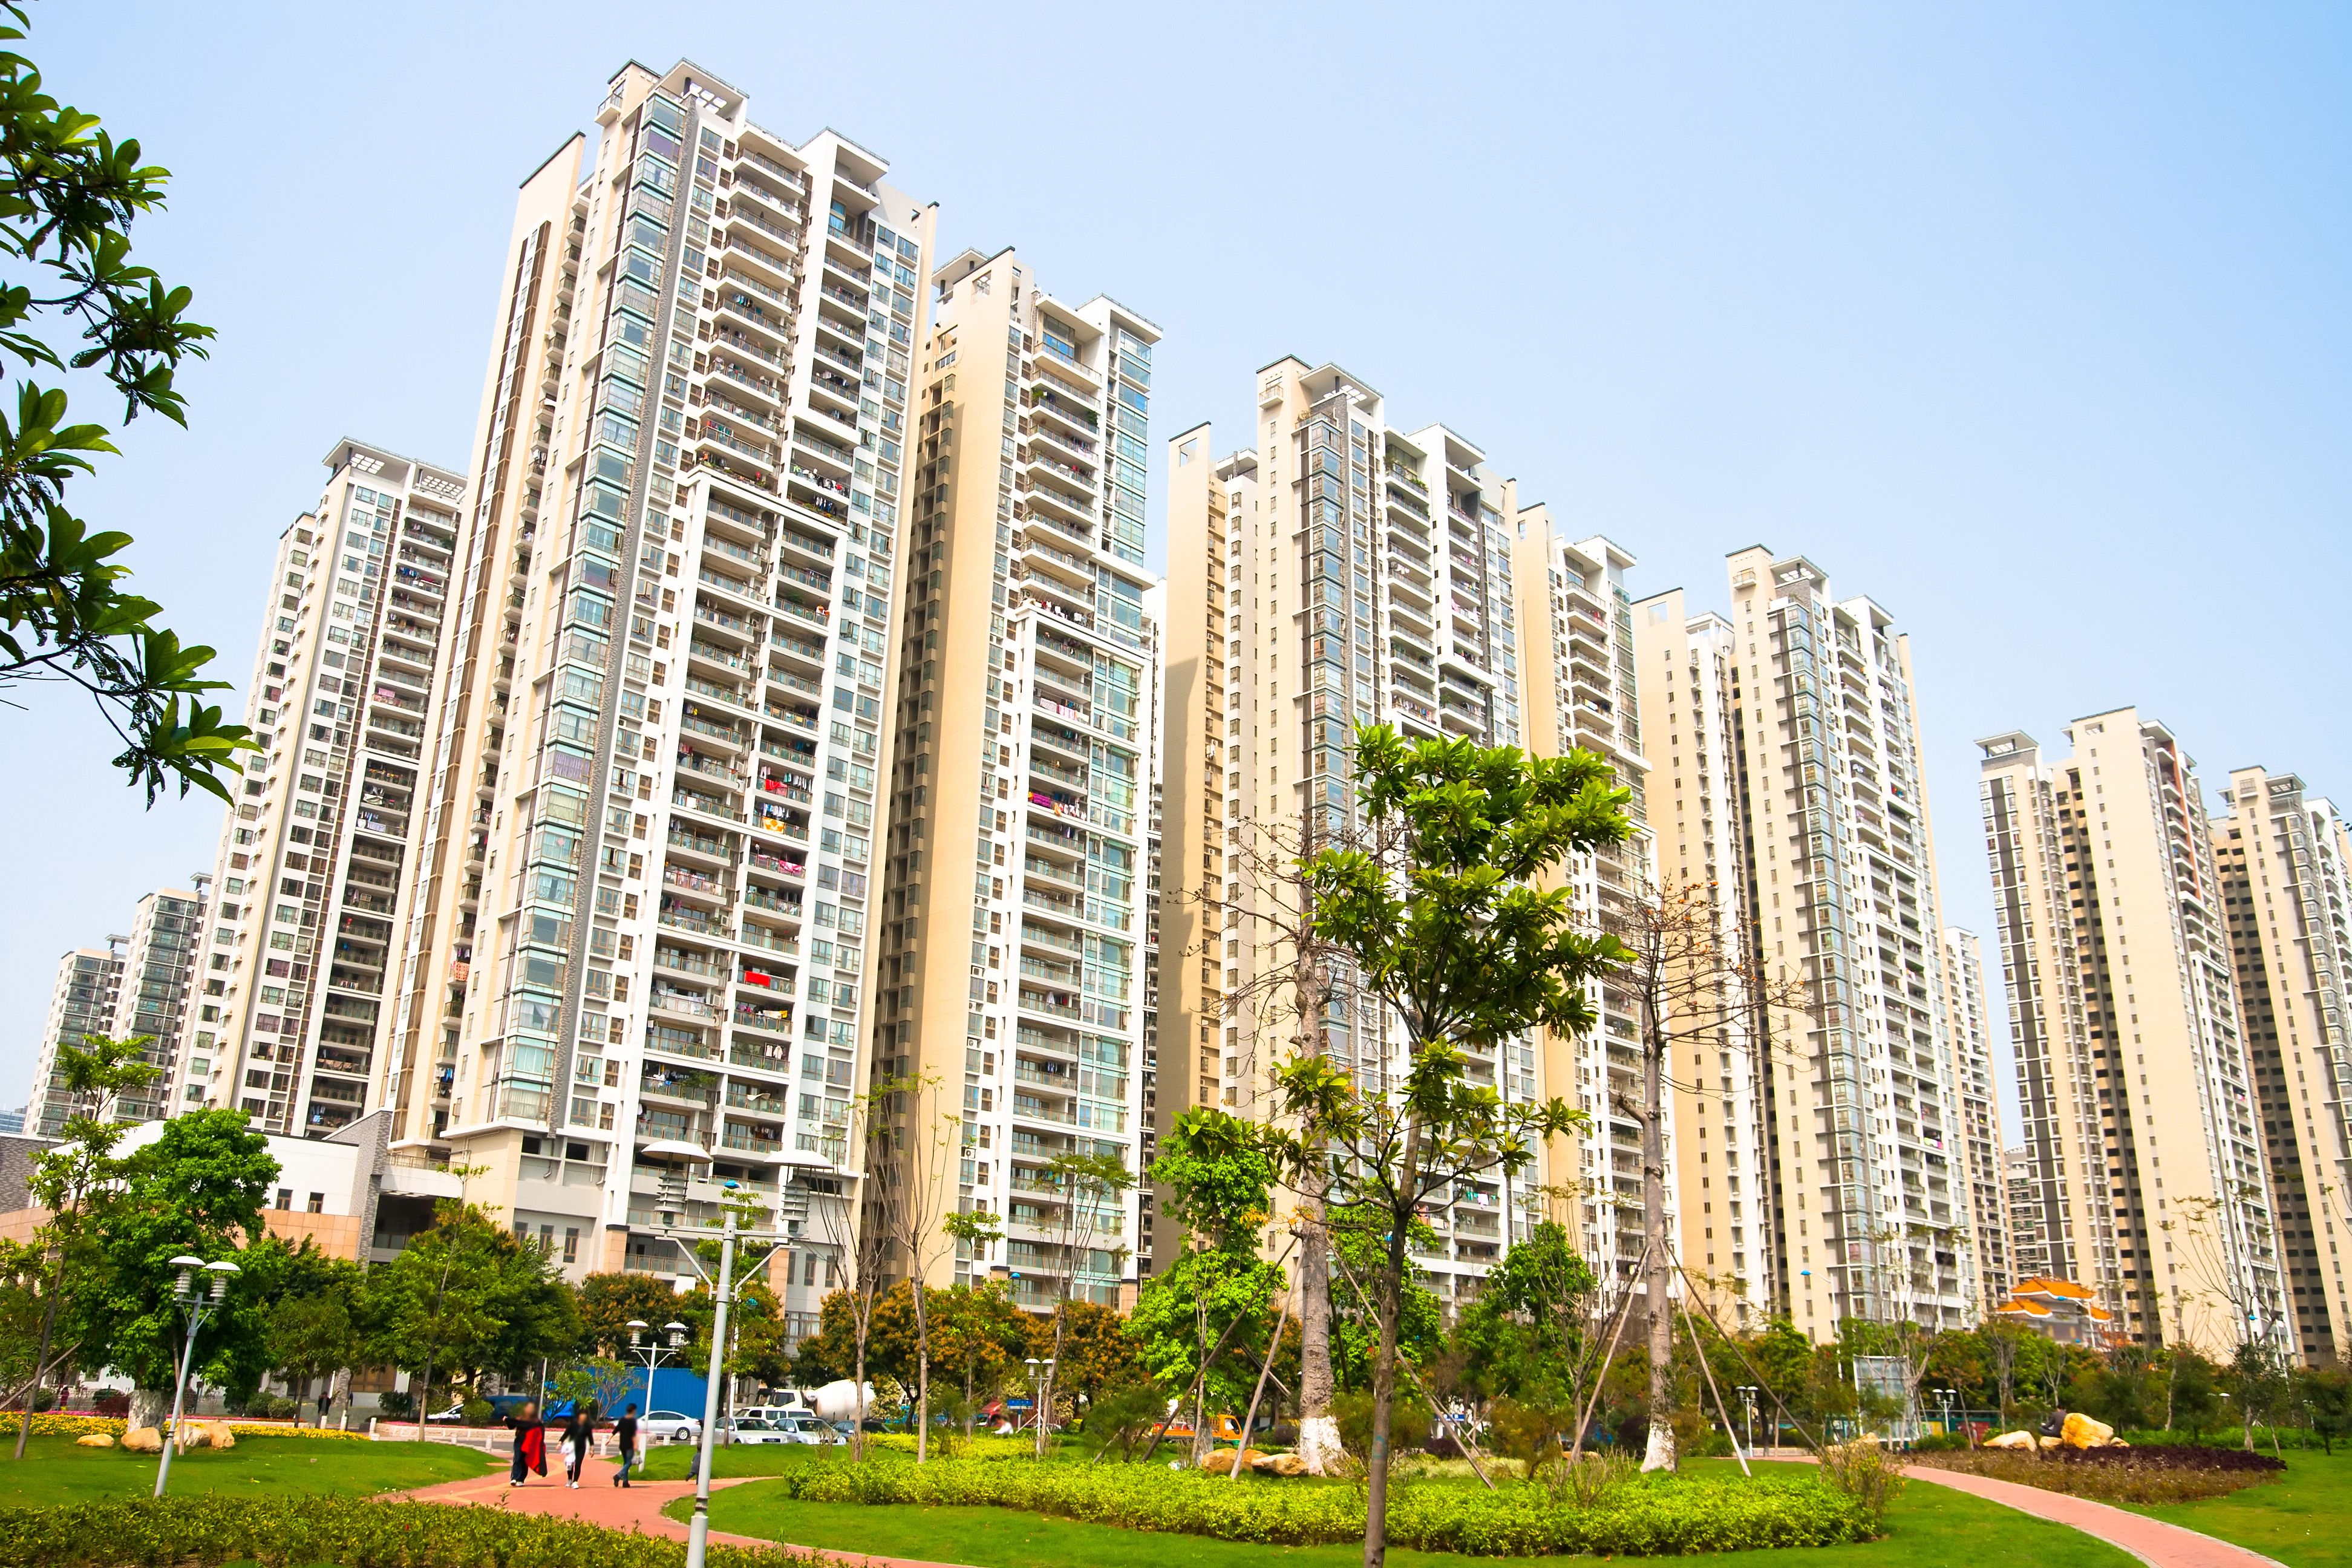 Residential apartments in Guangzhou, China. Image by GuoZhongHua / Shutterstock. China, undated.